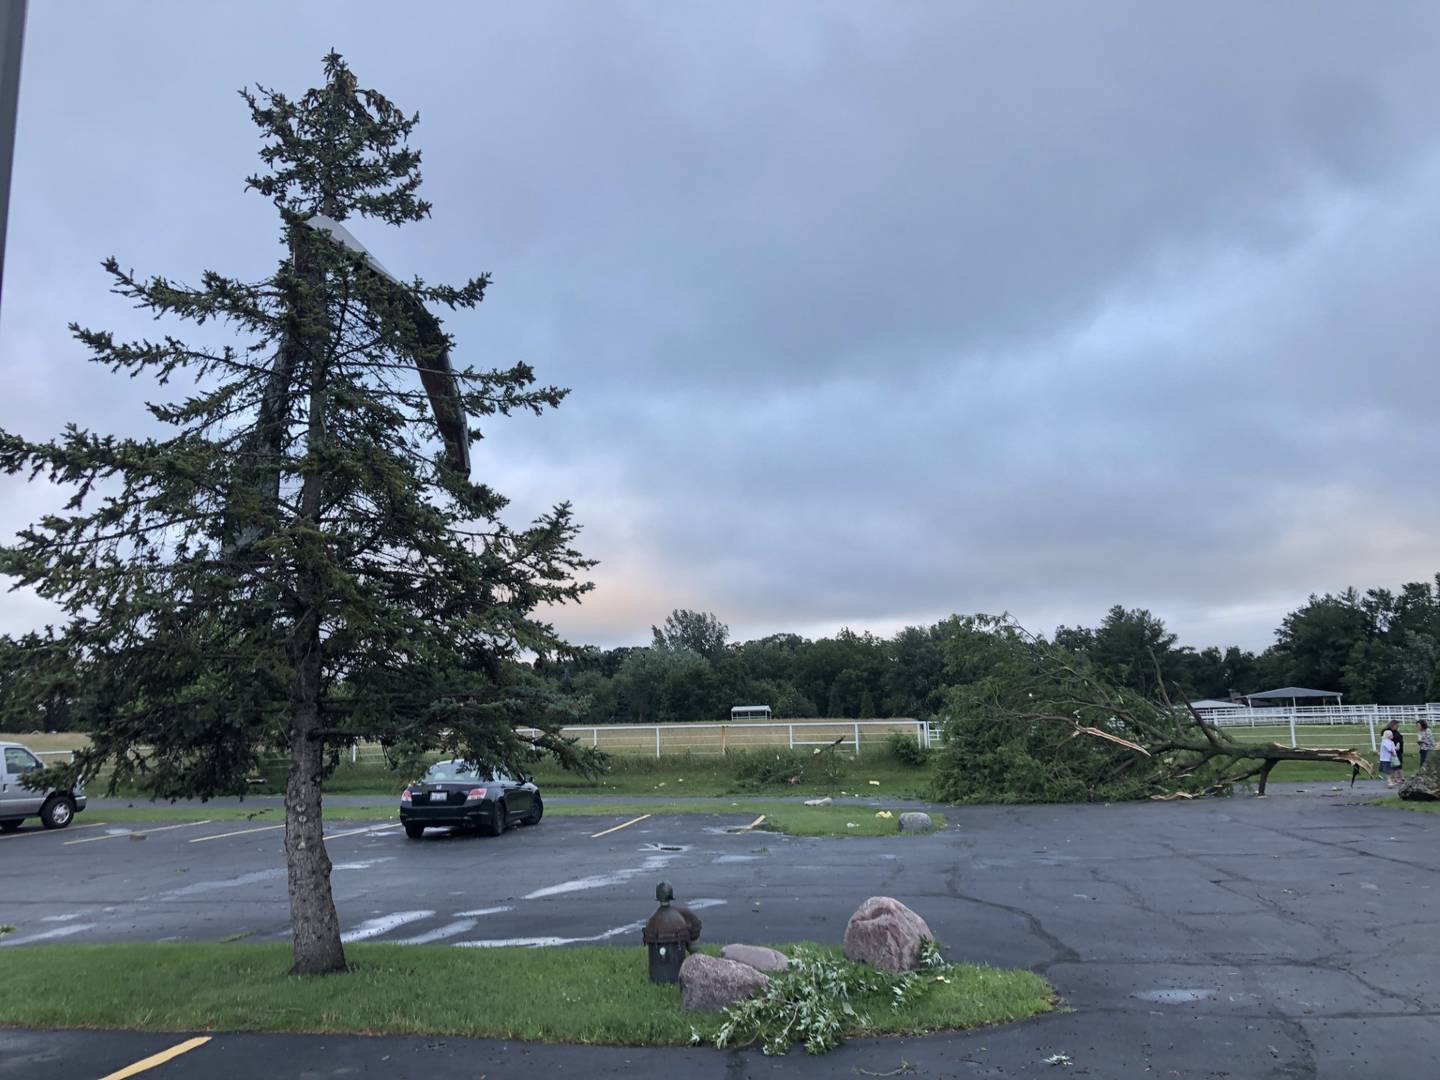 Northwest Bible Baptist Church lost the southmost section of its roof to the storm, and pieces of the roof were left scattered around the property at 9N889 Nesler Rd. in Elgin in the evening of July 12, 2023.